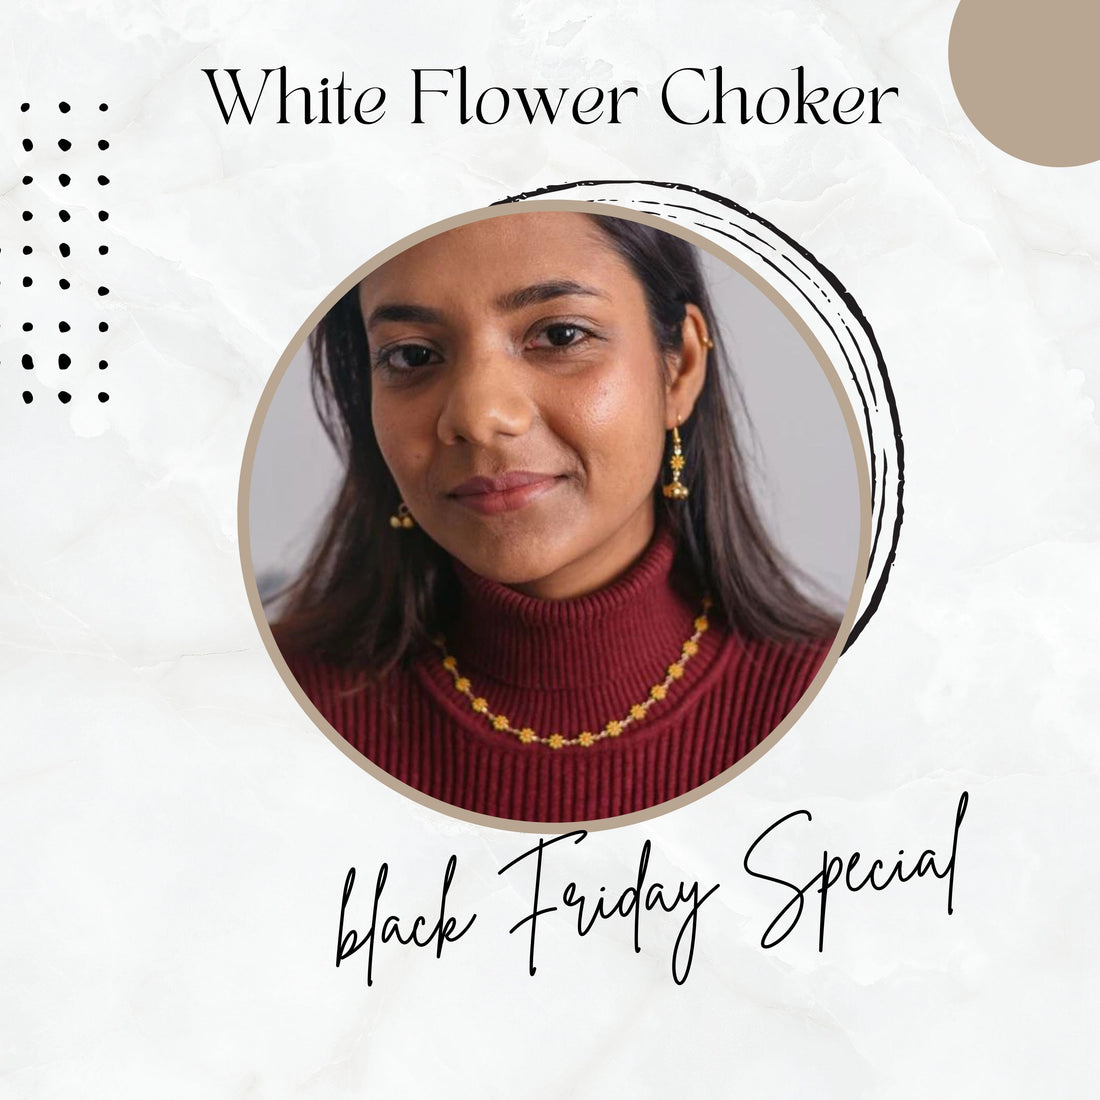 White Flower Choker: One of the nine Best Products you must own this Black Friday.